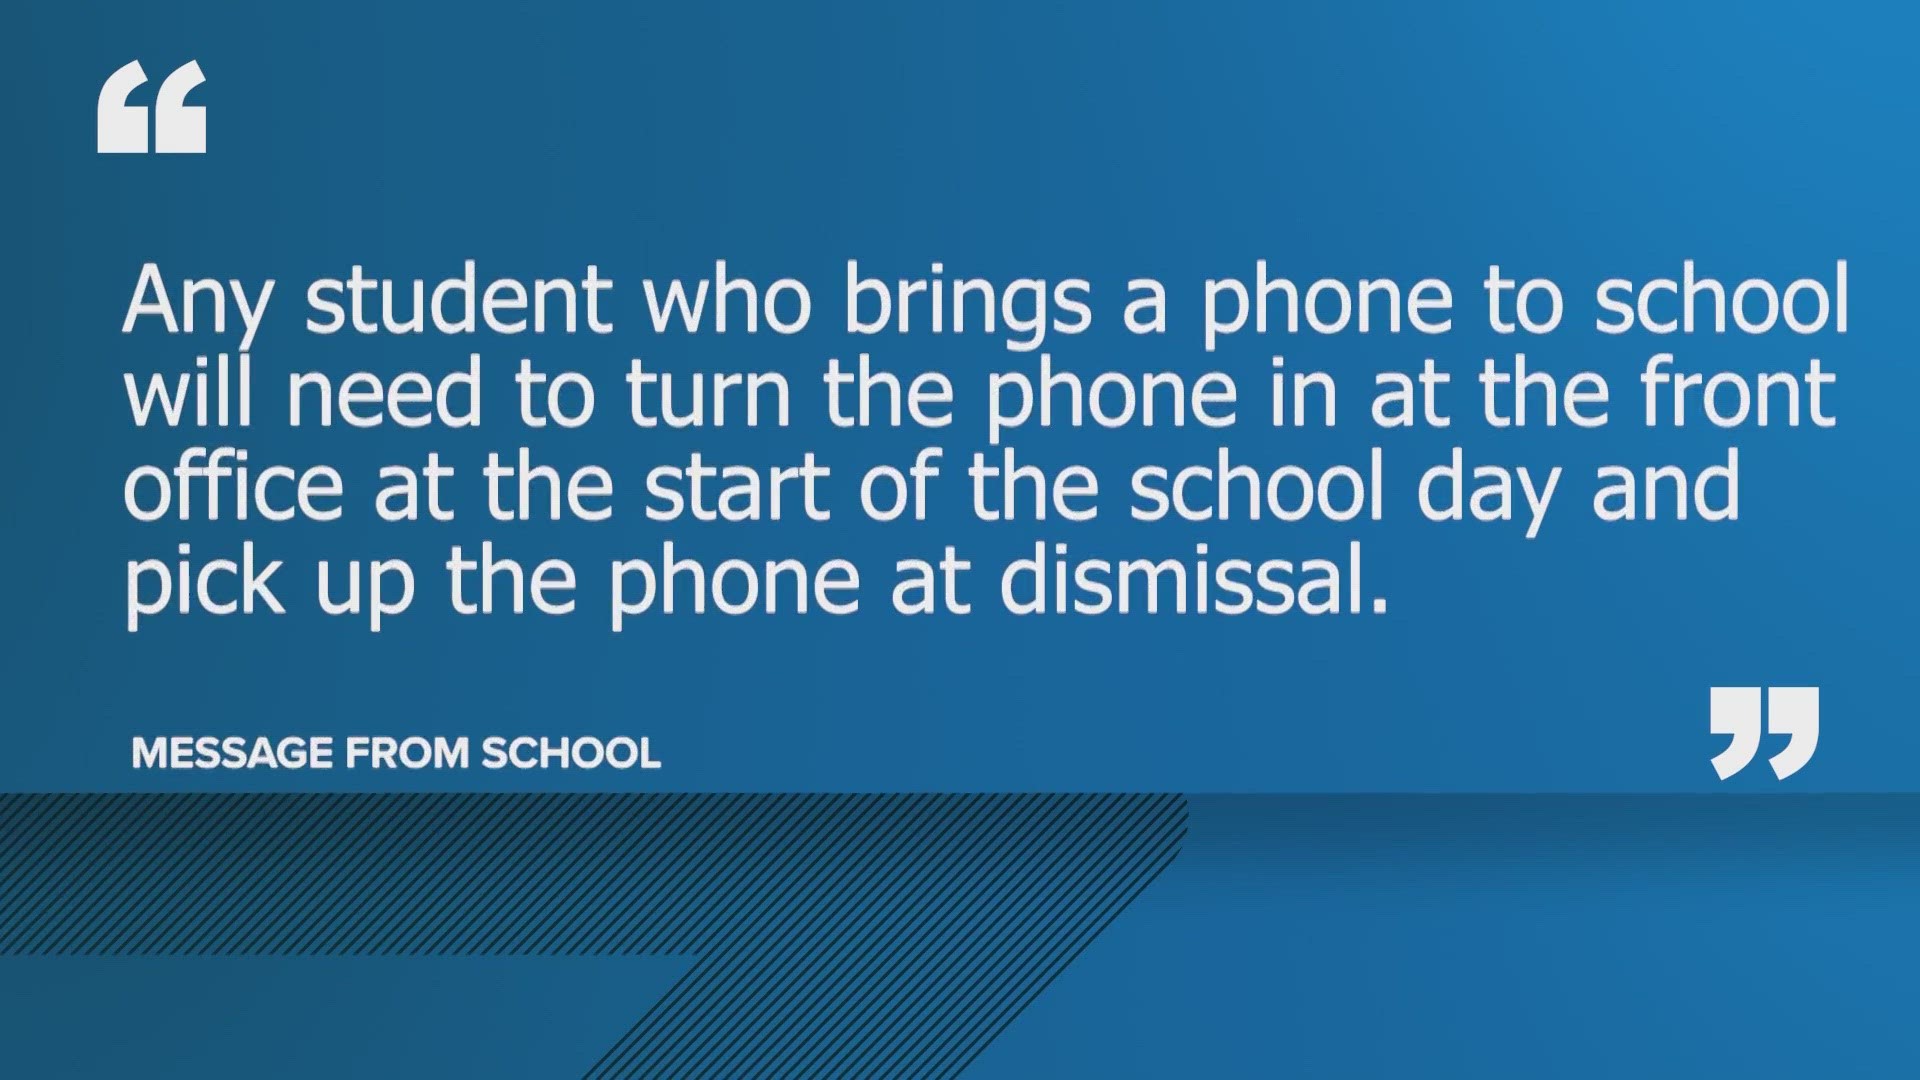 The district said fights centered around cellphones led to cellphones being prohibited.